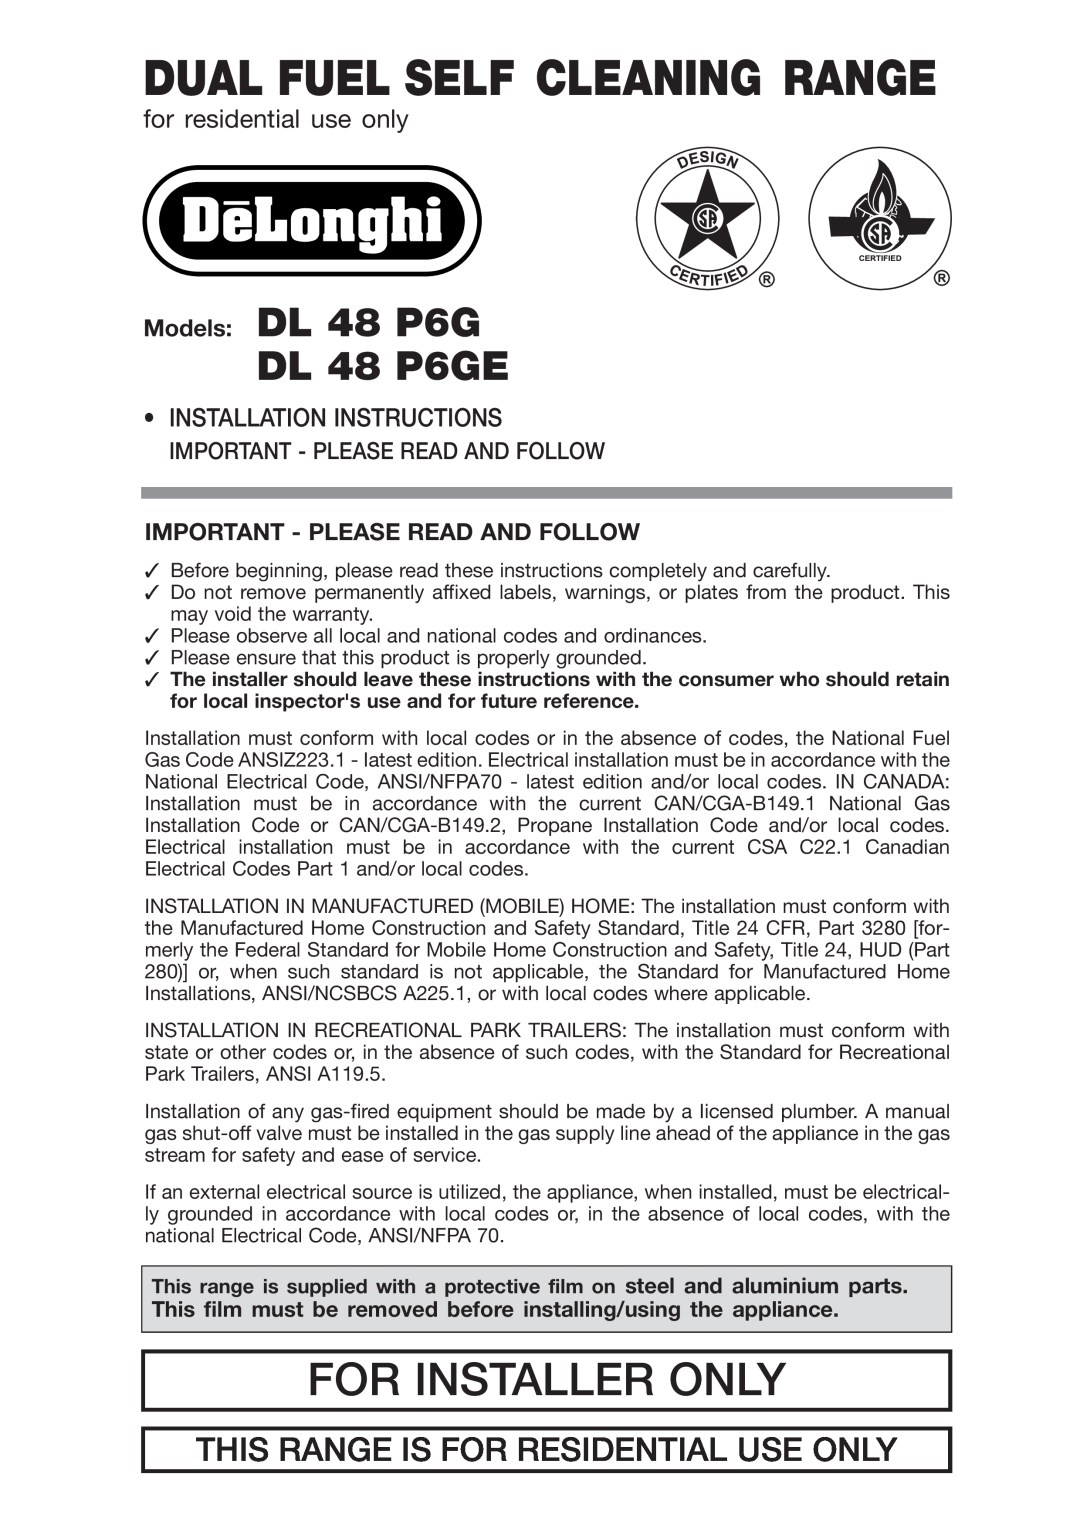 DeLonghi DL48P6G-E warranty Important - Please Read And Follow, Dual Fuel Self Cleaning Range, For Installer Only 